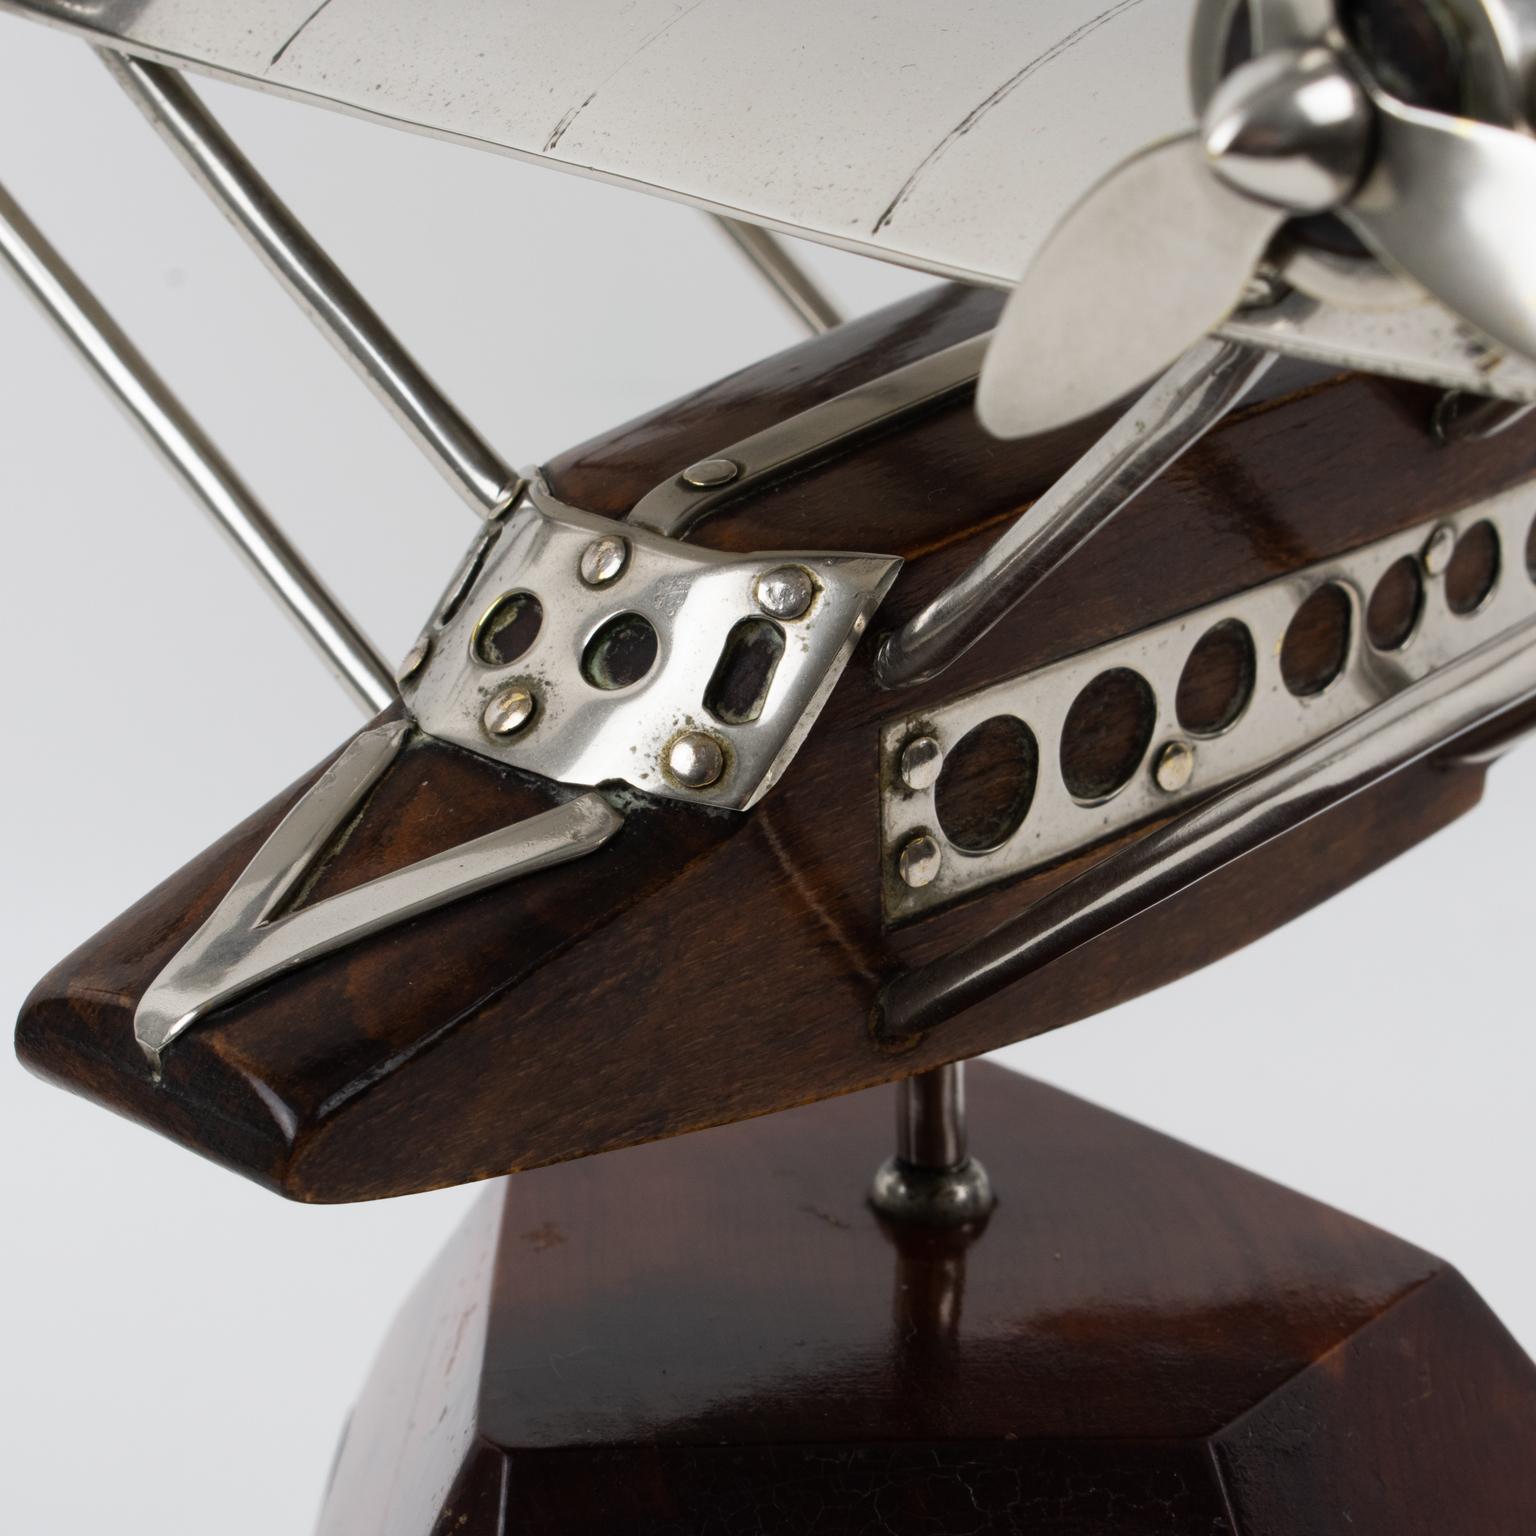 Art Deco Wood and Chrome Airplane SeaPlane Aviation Model, France 1940s For Sale 7